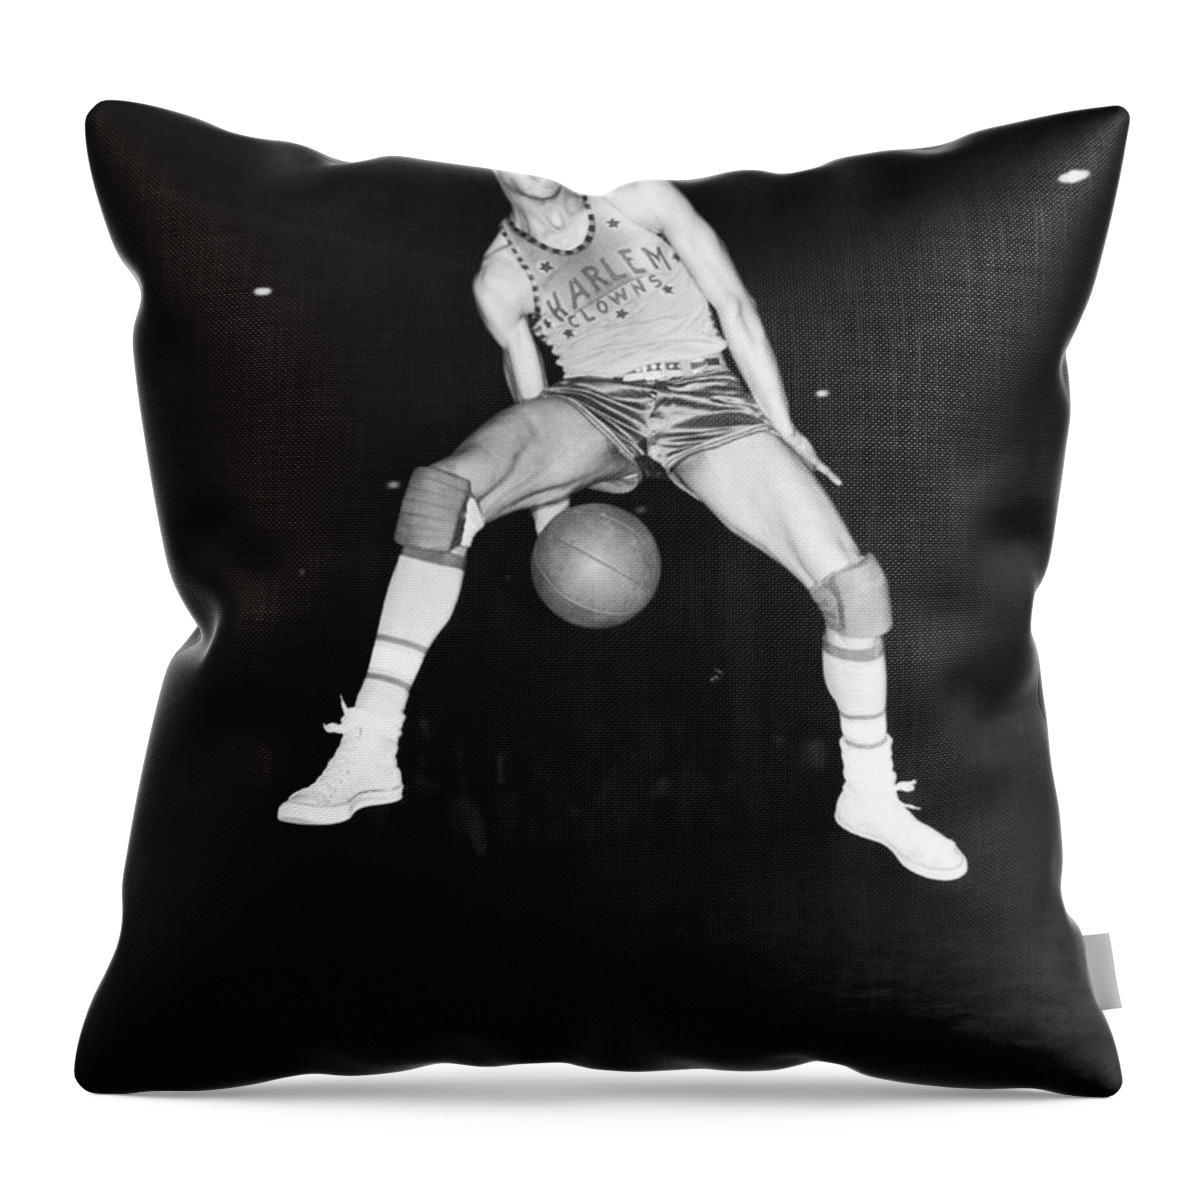 1 Person Throw Pillow featuring the photograph Harlem Clowns Basketball by Underwood Archives